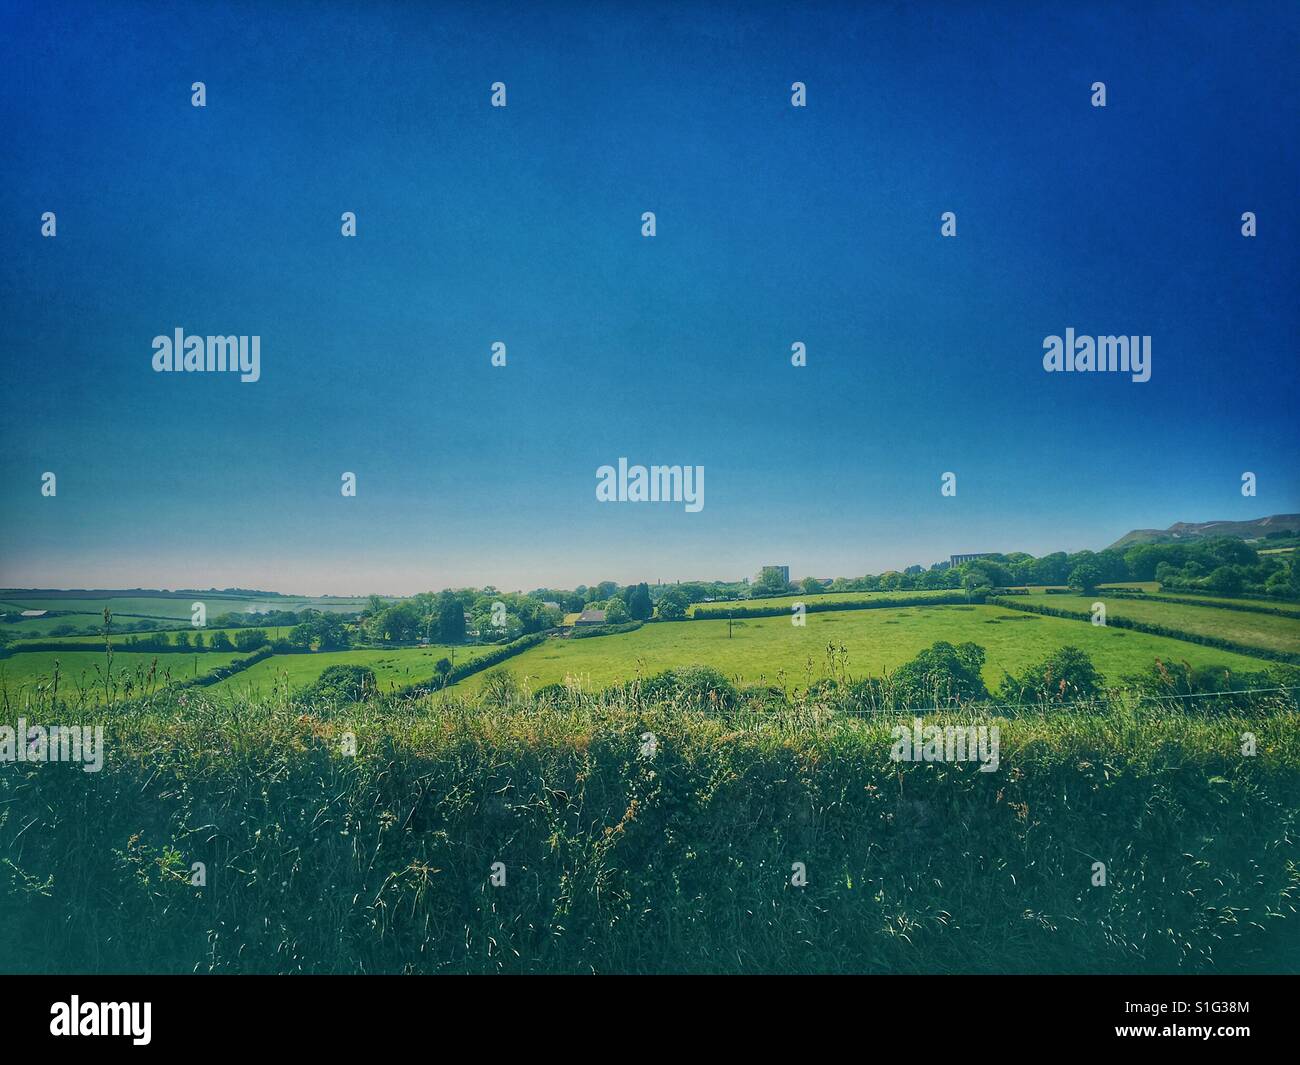 Scenic view of rural countryside in Cornwall UK with brilliant blue sky and lush green fields. Cornish landscape with vintage filter. Stock Photo